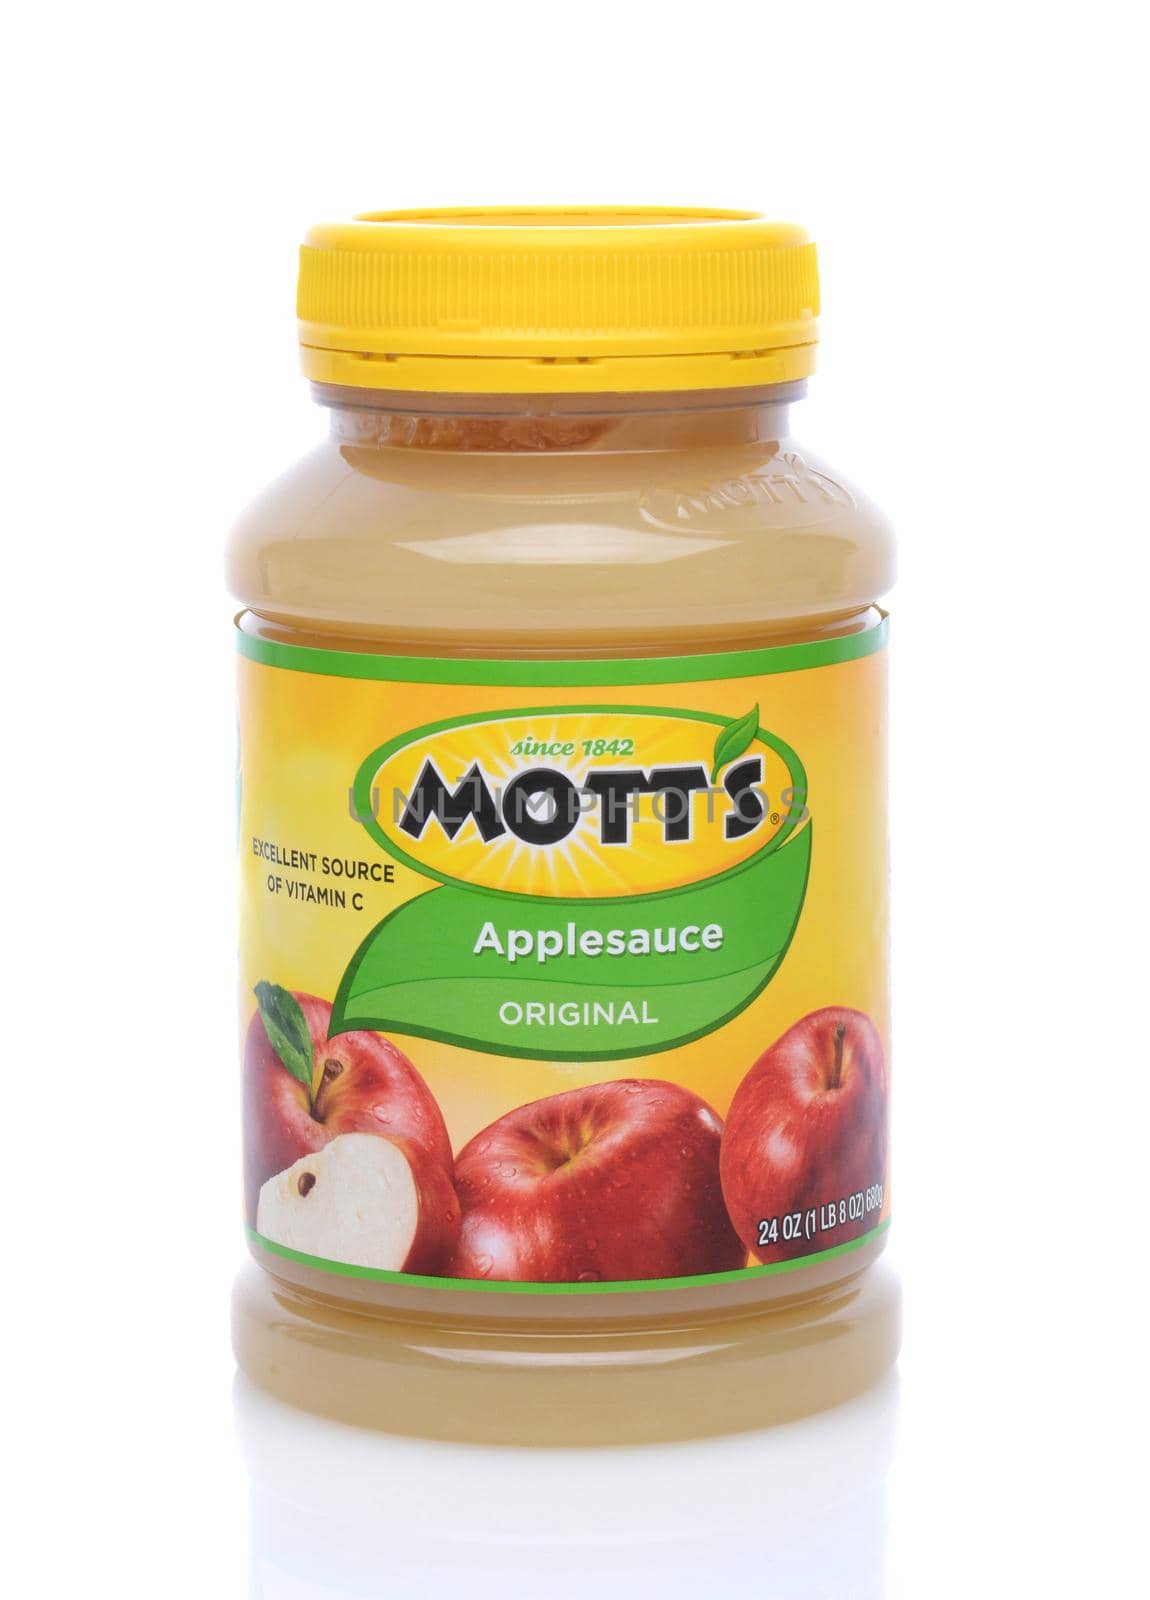 IRVINE, CA - May 14, 2014: A 24 ounce jar of Motts Original Apple Sauce. Founded in 1842 by Samuel R. Mott they produce apple-based products, such as juices and sauces.